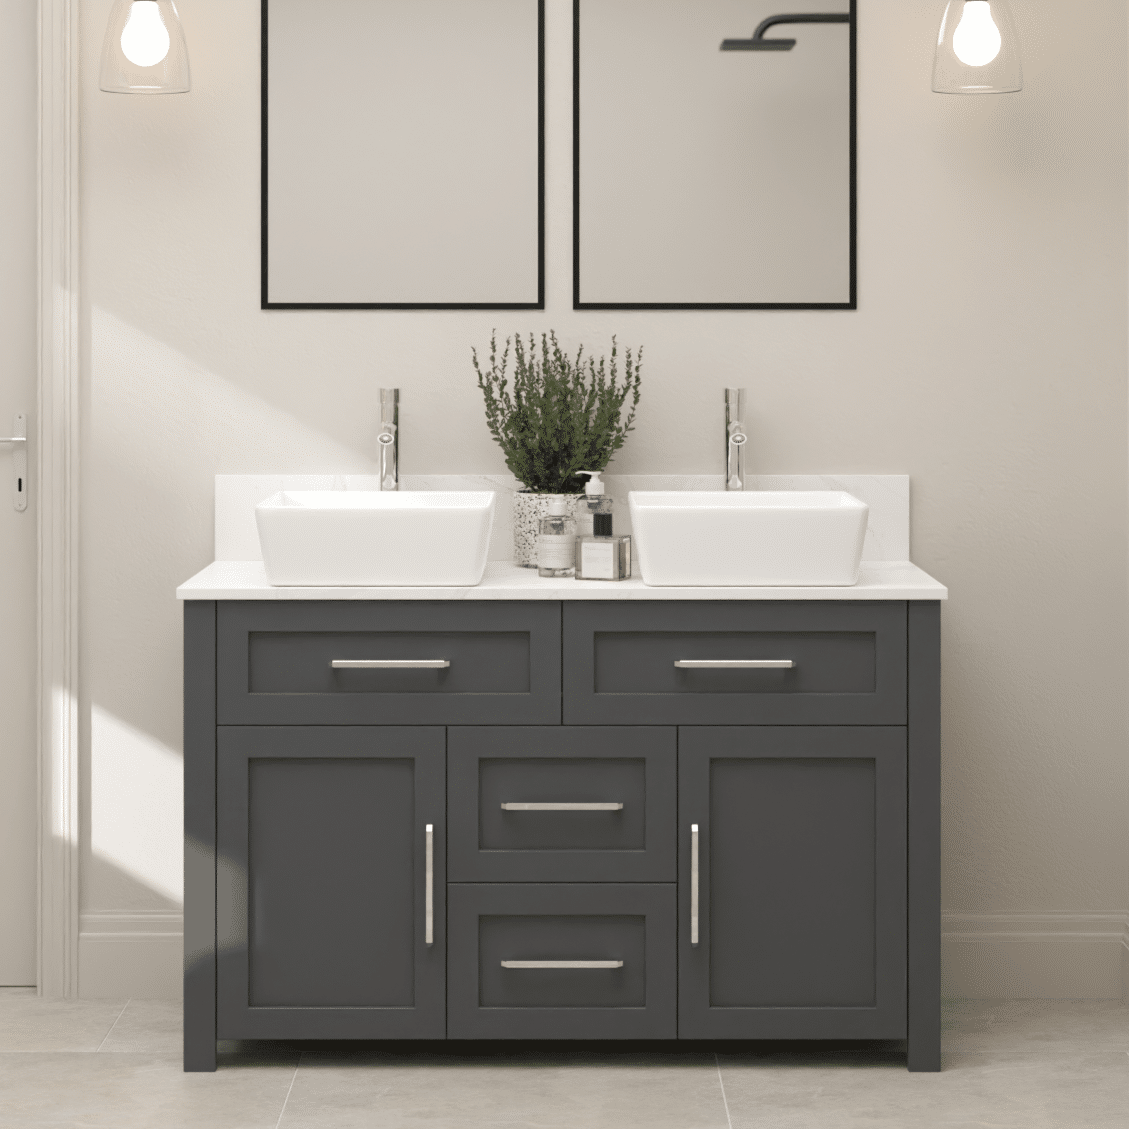 Double top mounted sink unit, luxury painted finish with shaker style doors and drawers, silver bar handles and square sinks